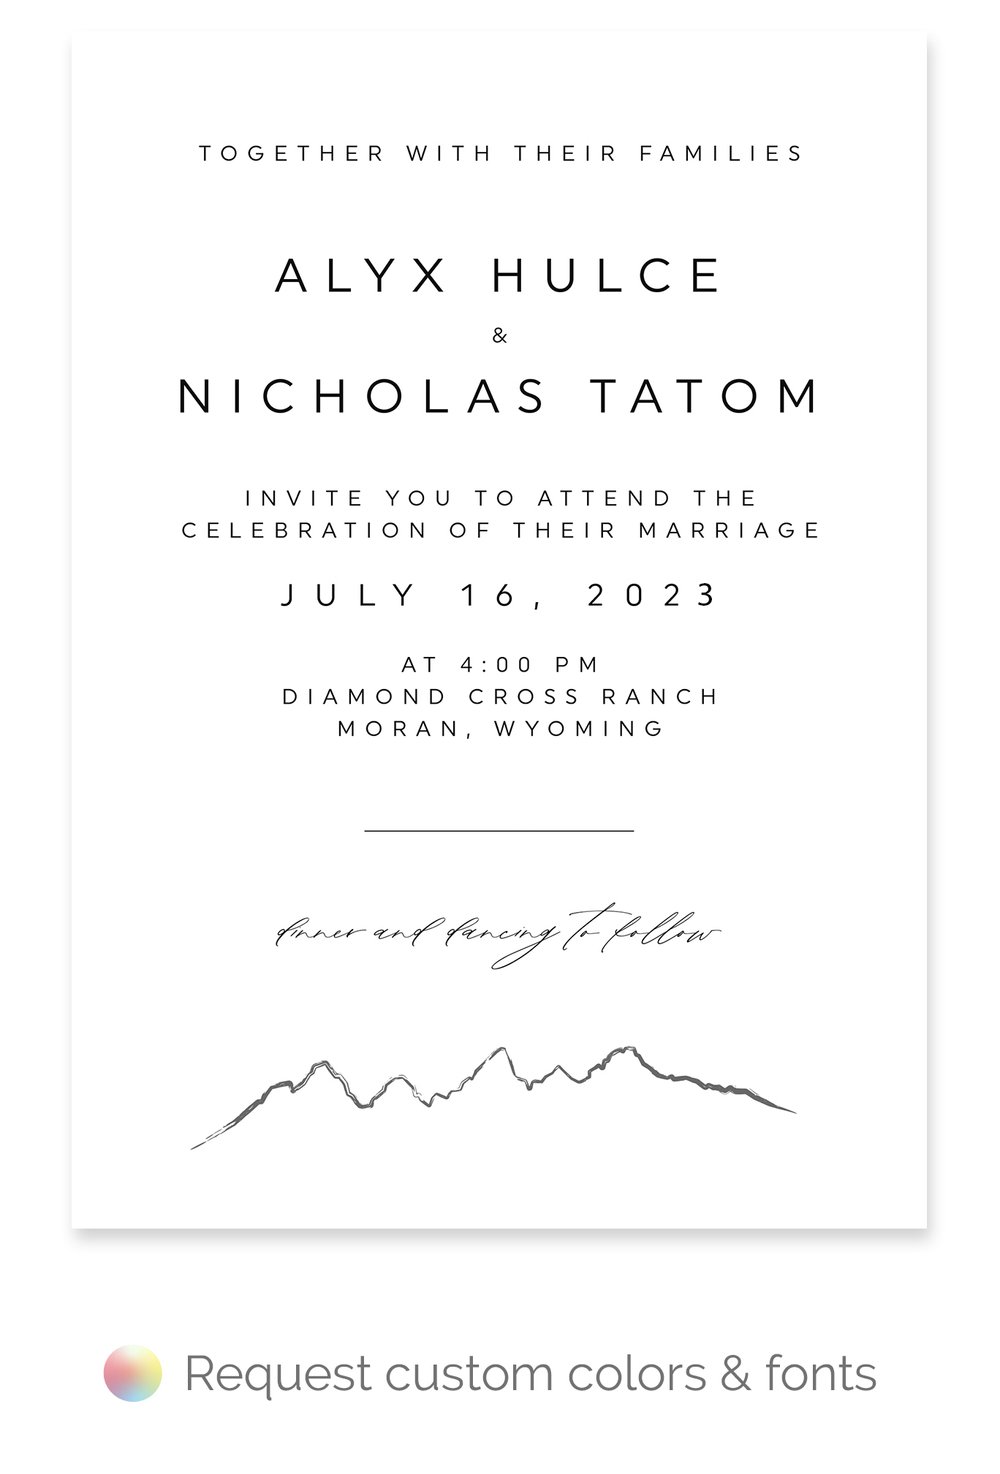 Rileys & Co 50 Pack Wedding Invitation Cards with Envelopes and